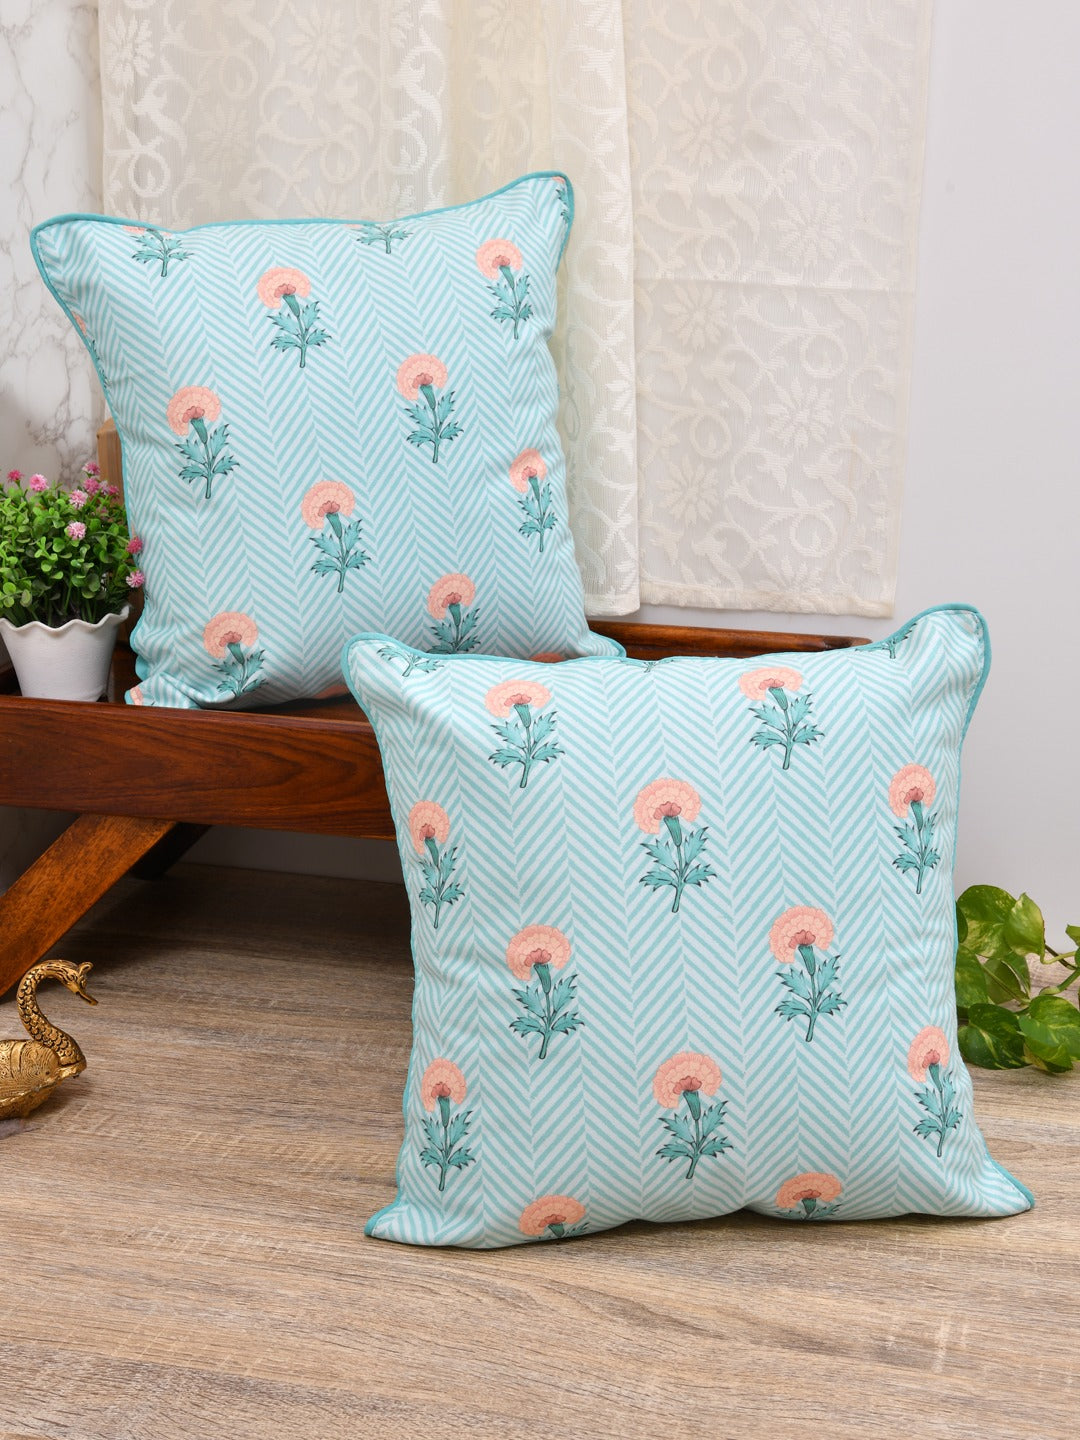 Set of 2 Polycotton Cushion Covers - 16 Inches